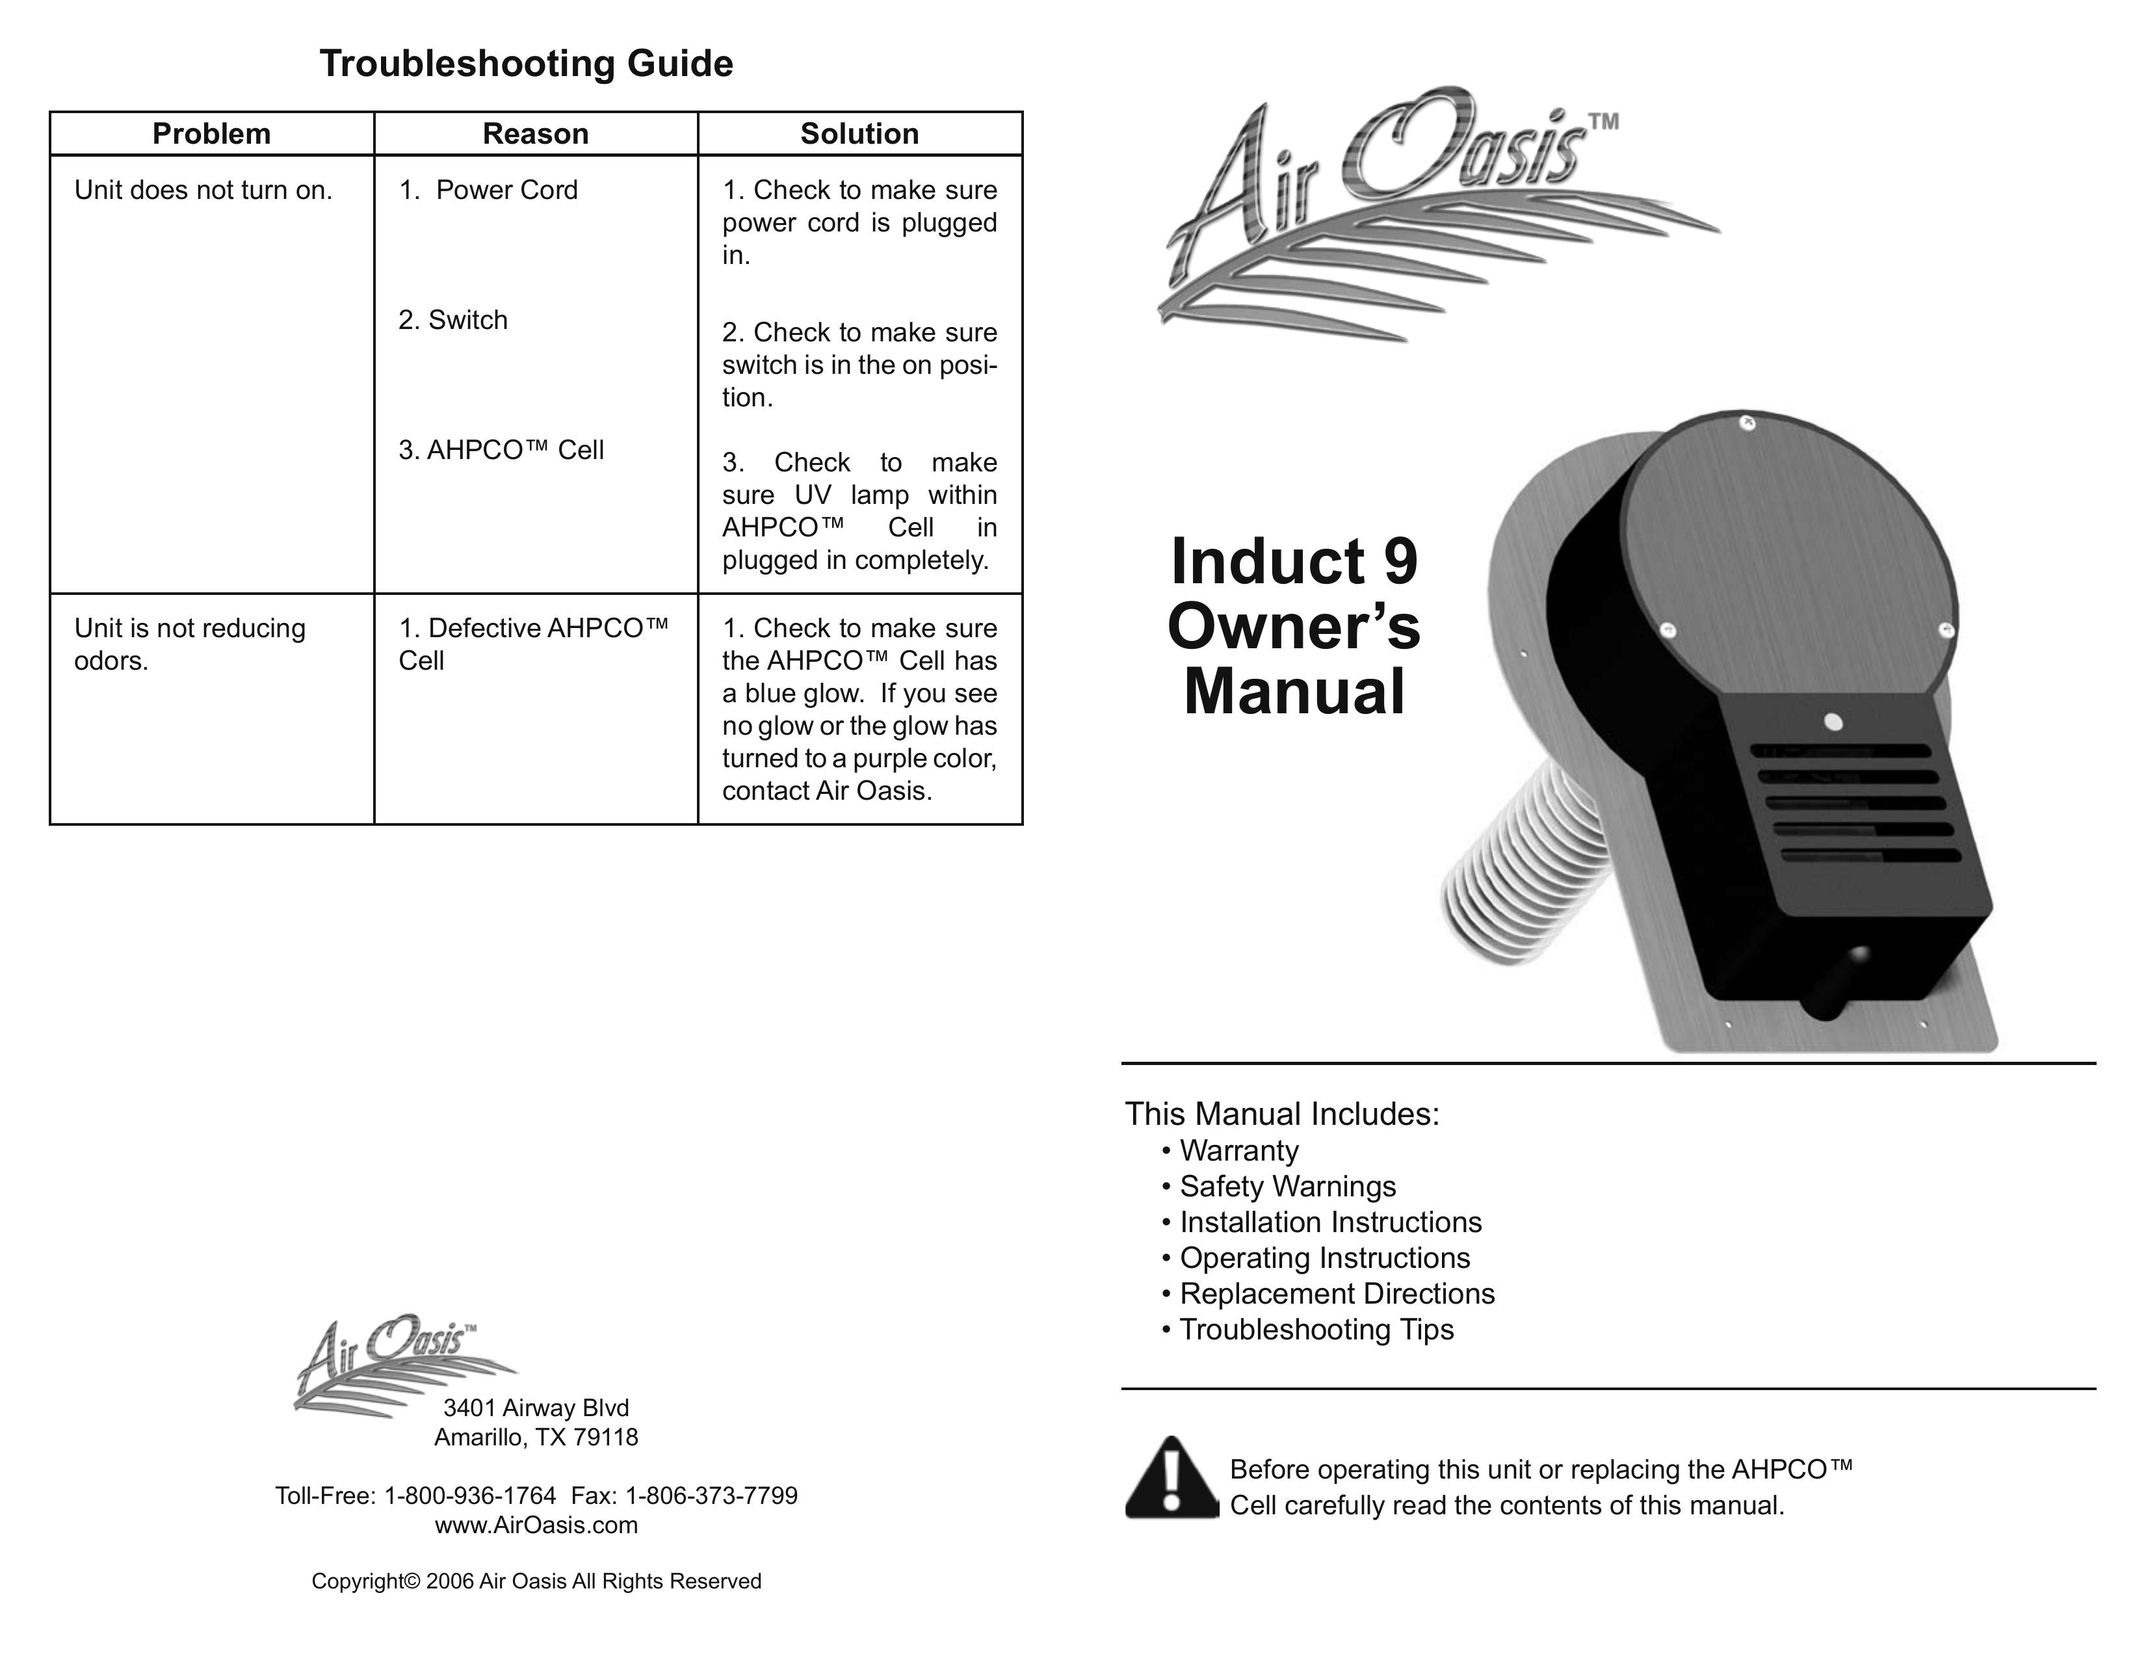 Air Oasis Induct 9 Air Cleaner User Manual (Page 1)